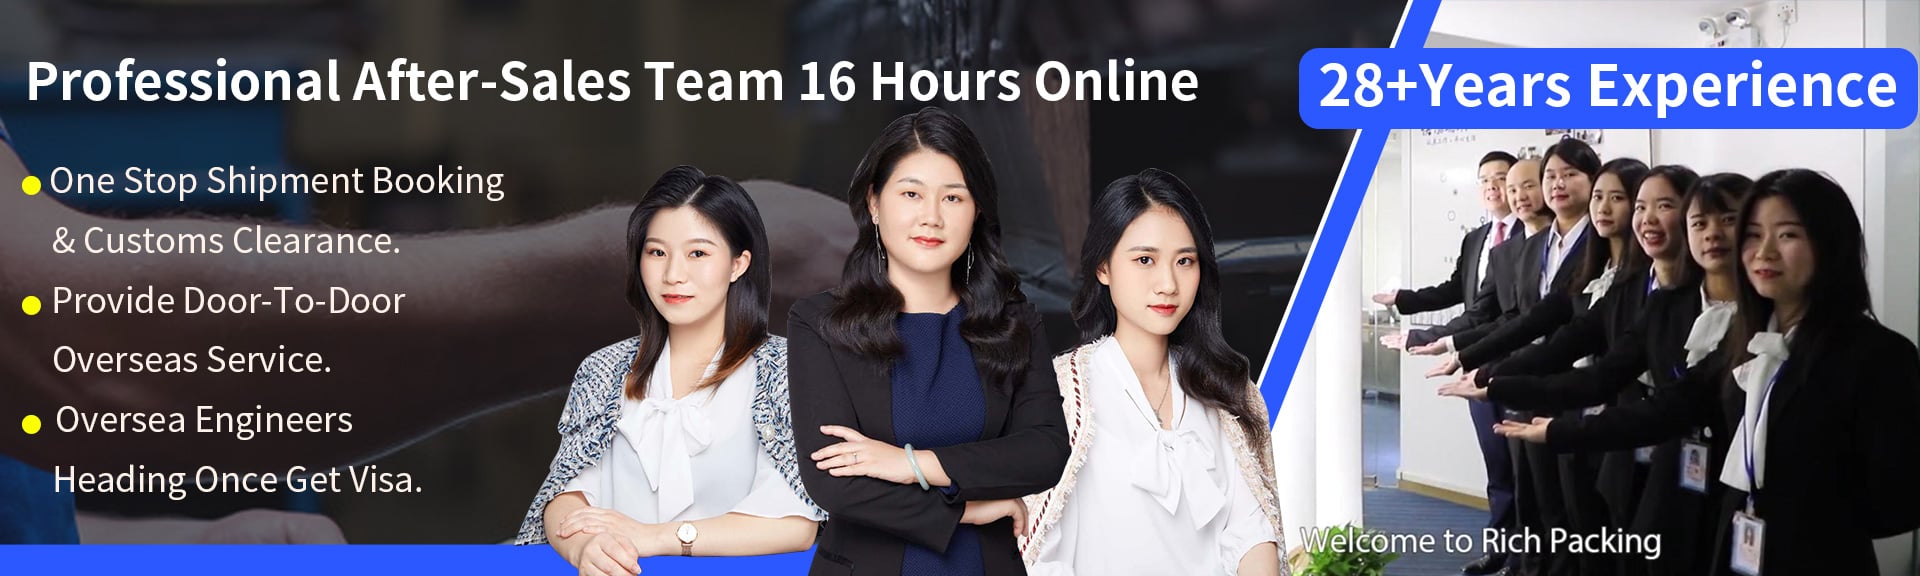 Professional After-Sales Team 16 Hours Online